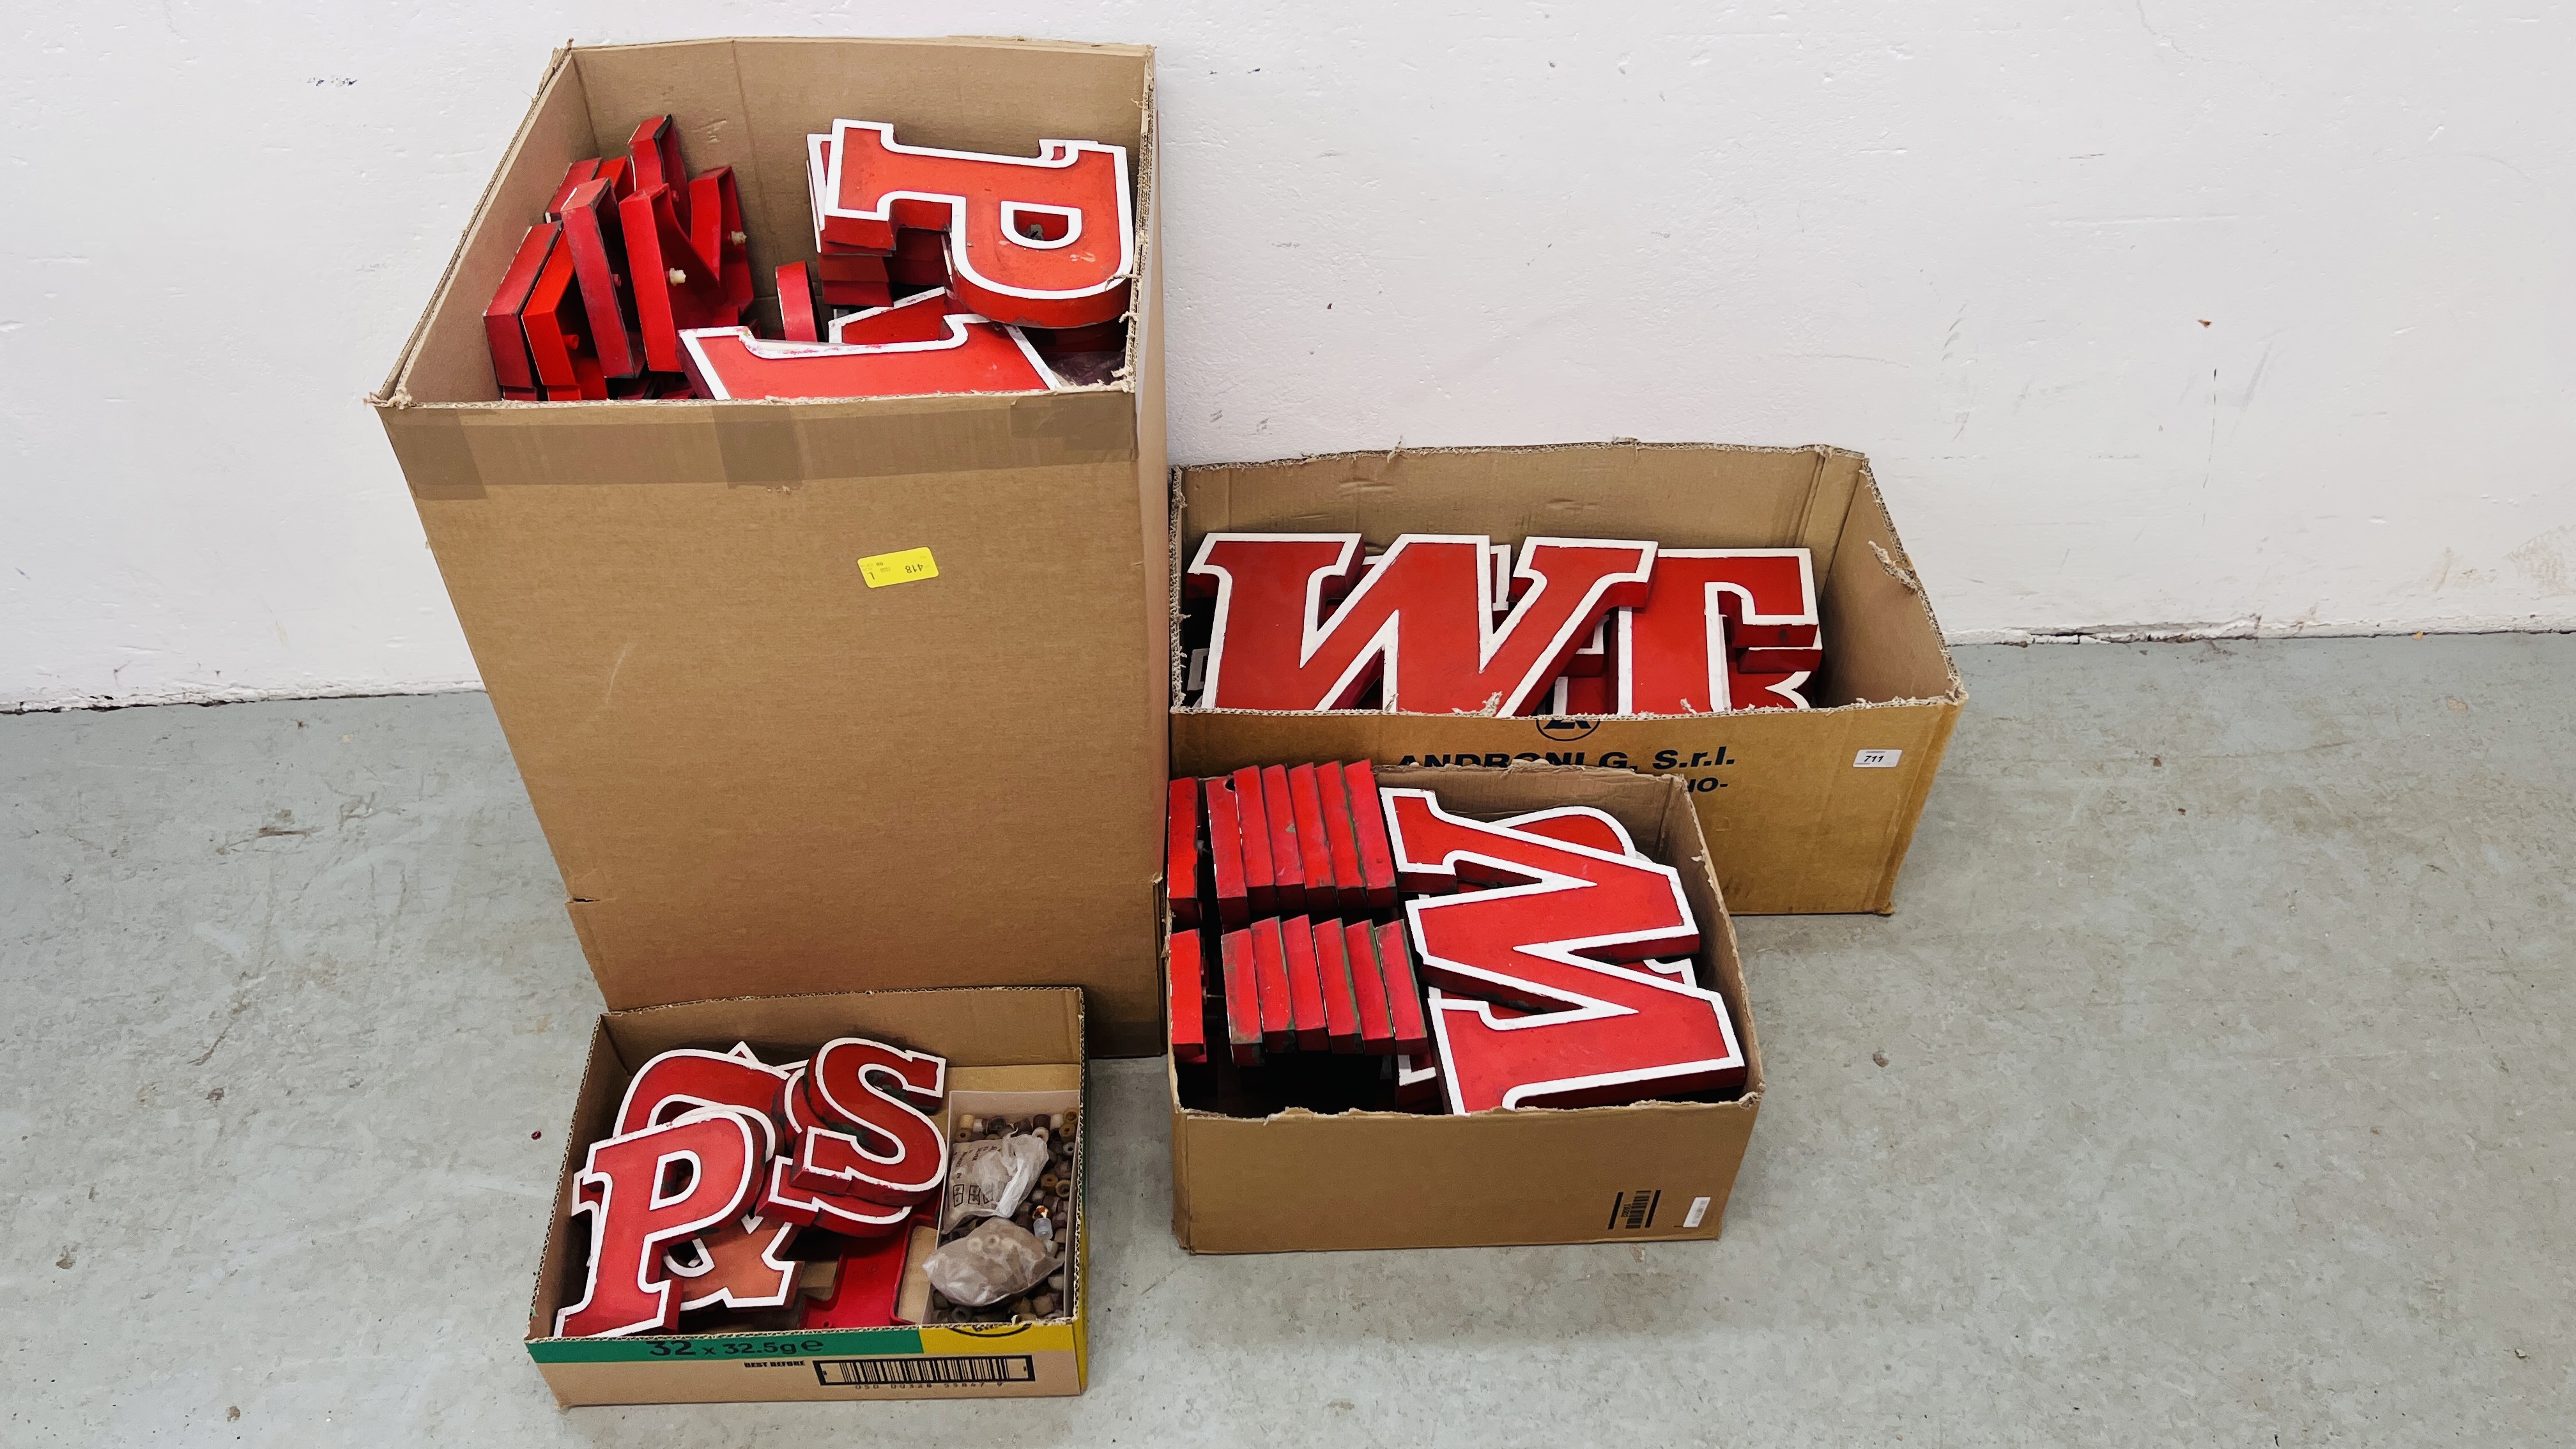 A QUANTITY OF 120 VINTAGE SIGNAGE LETTERING (LARGEST CHARACTER HEIGHT 30.